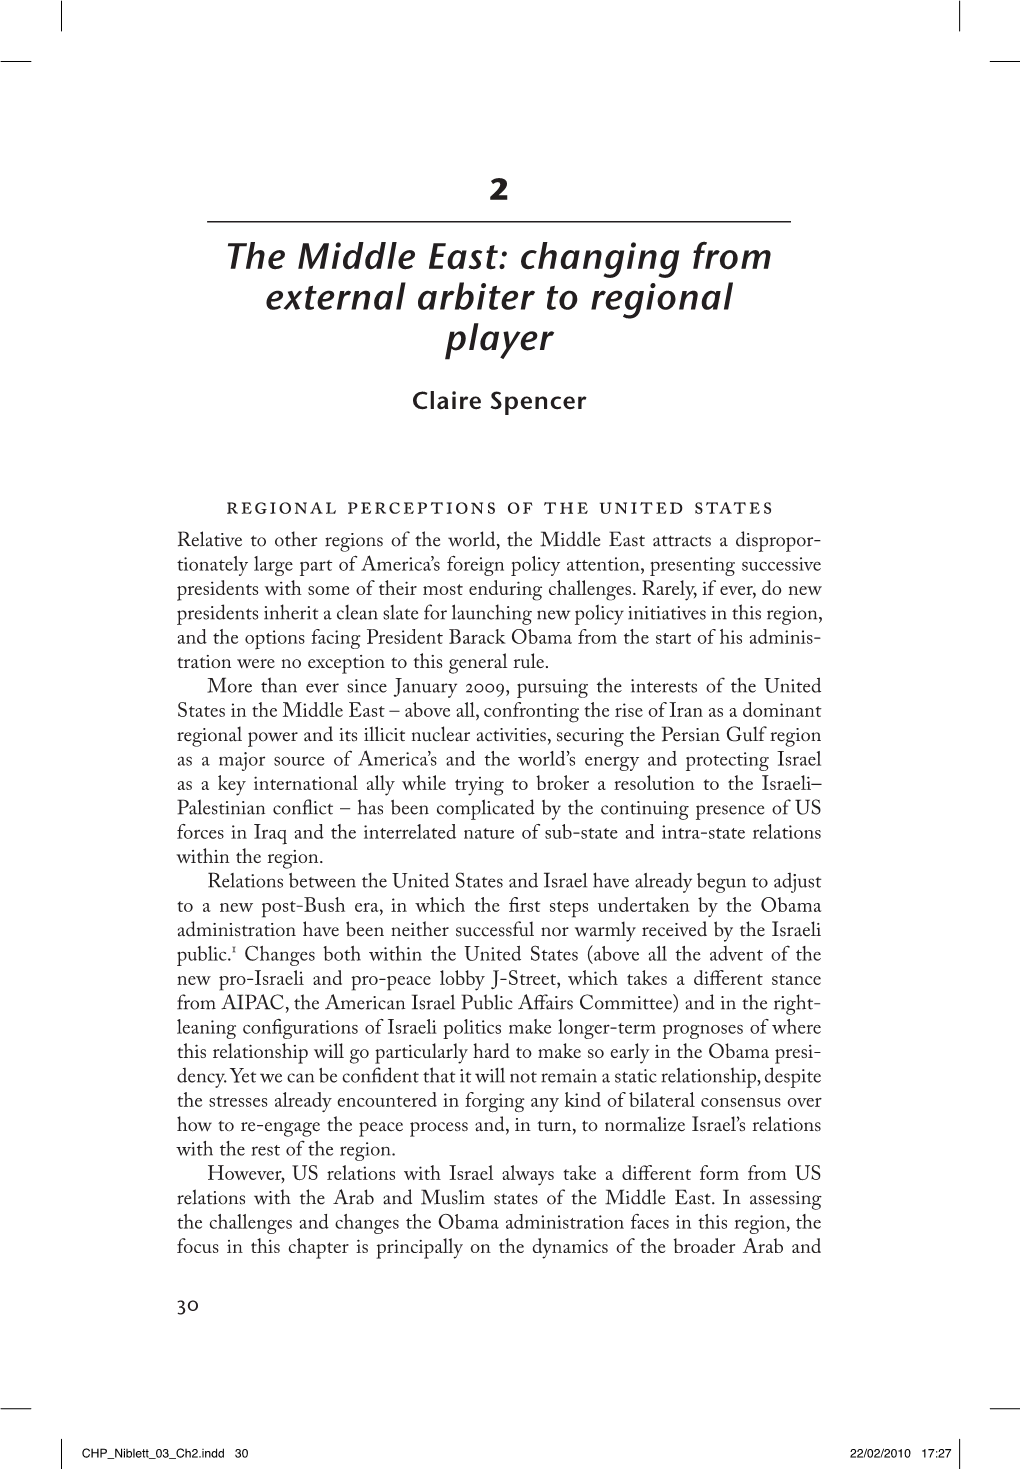 The Middle East: Changing from External Arbiter to Regional Player